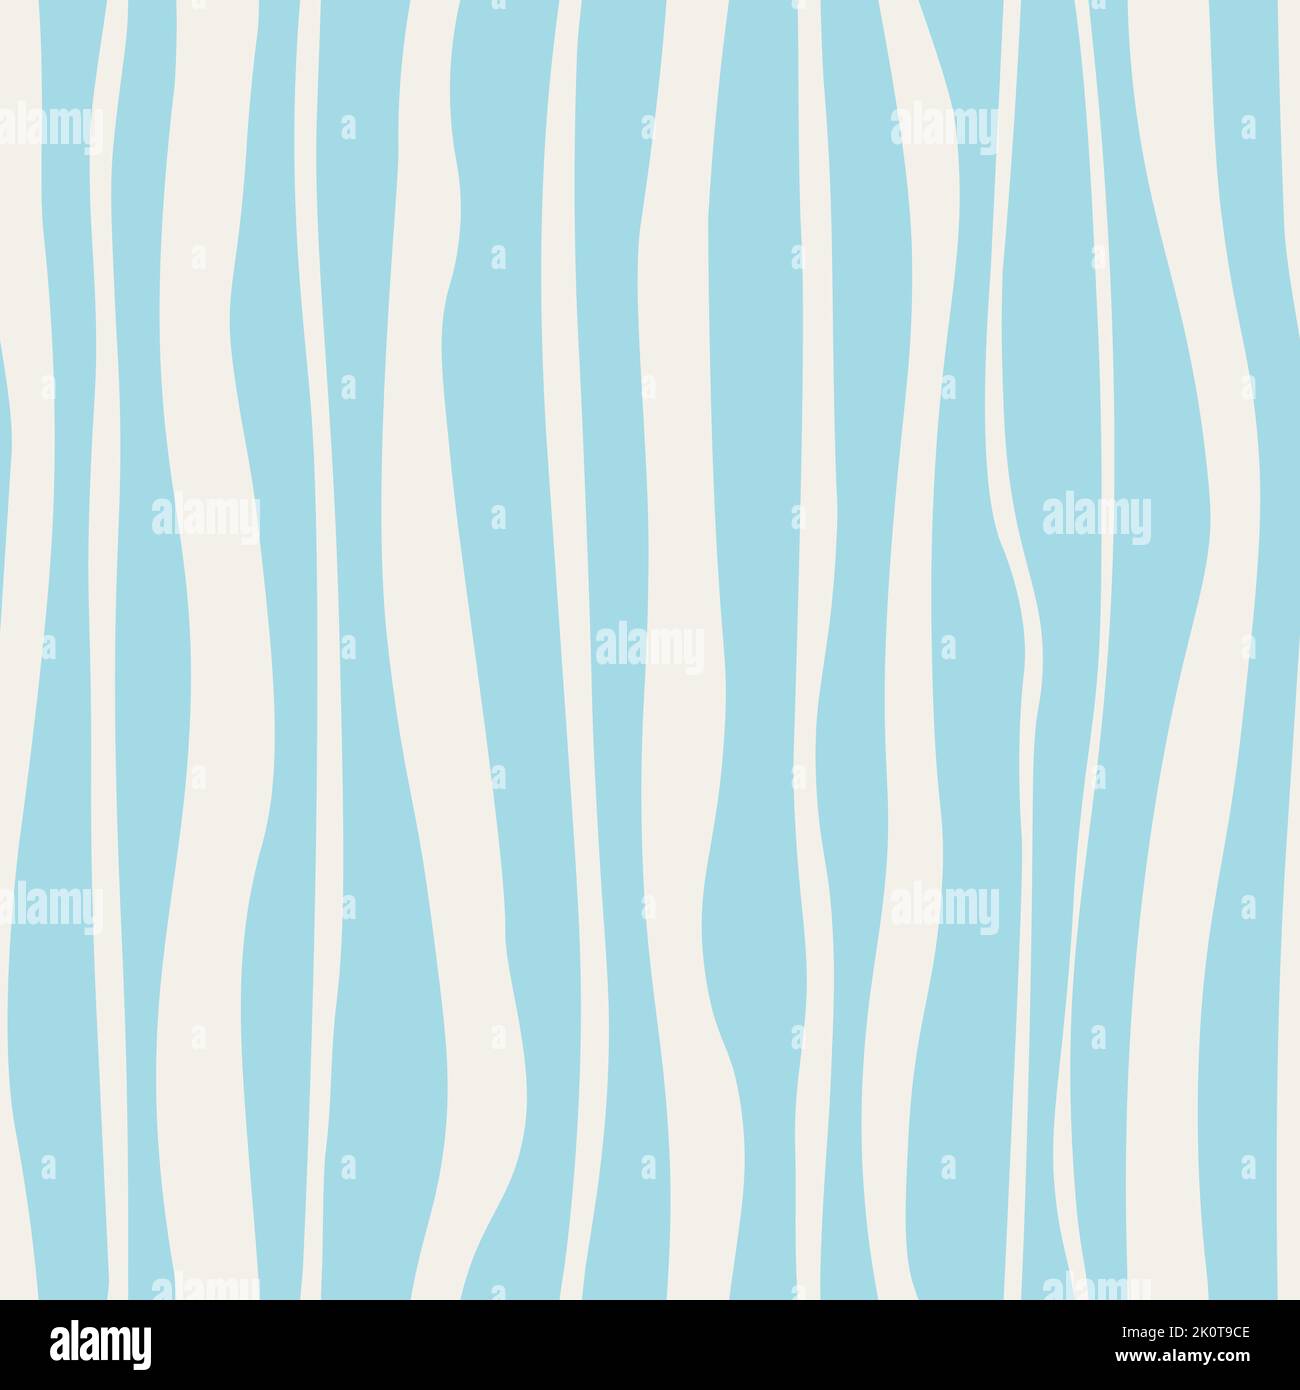 Vector seamless pattern. White uneven stripes on a blue background. Ideal for design, wallpaper, packaging, textiles, scrapbooking. Stock Vector